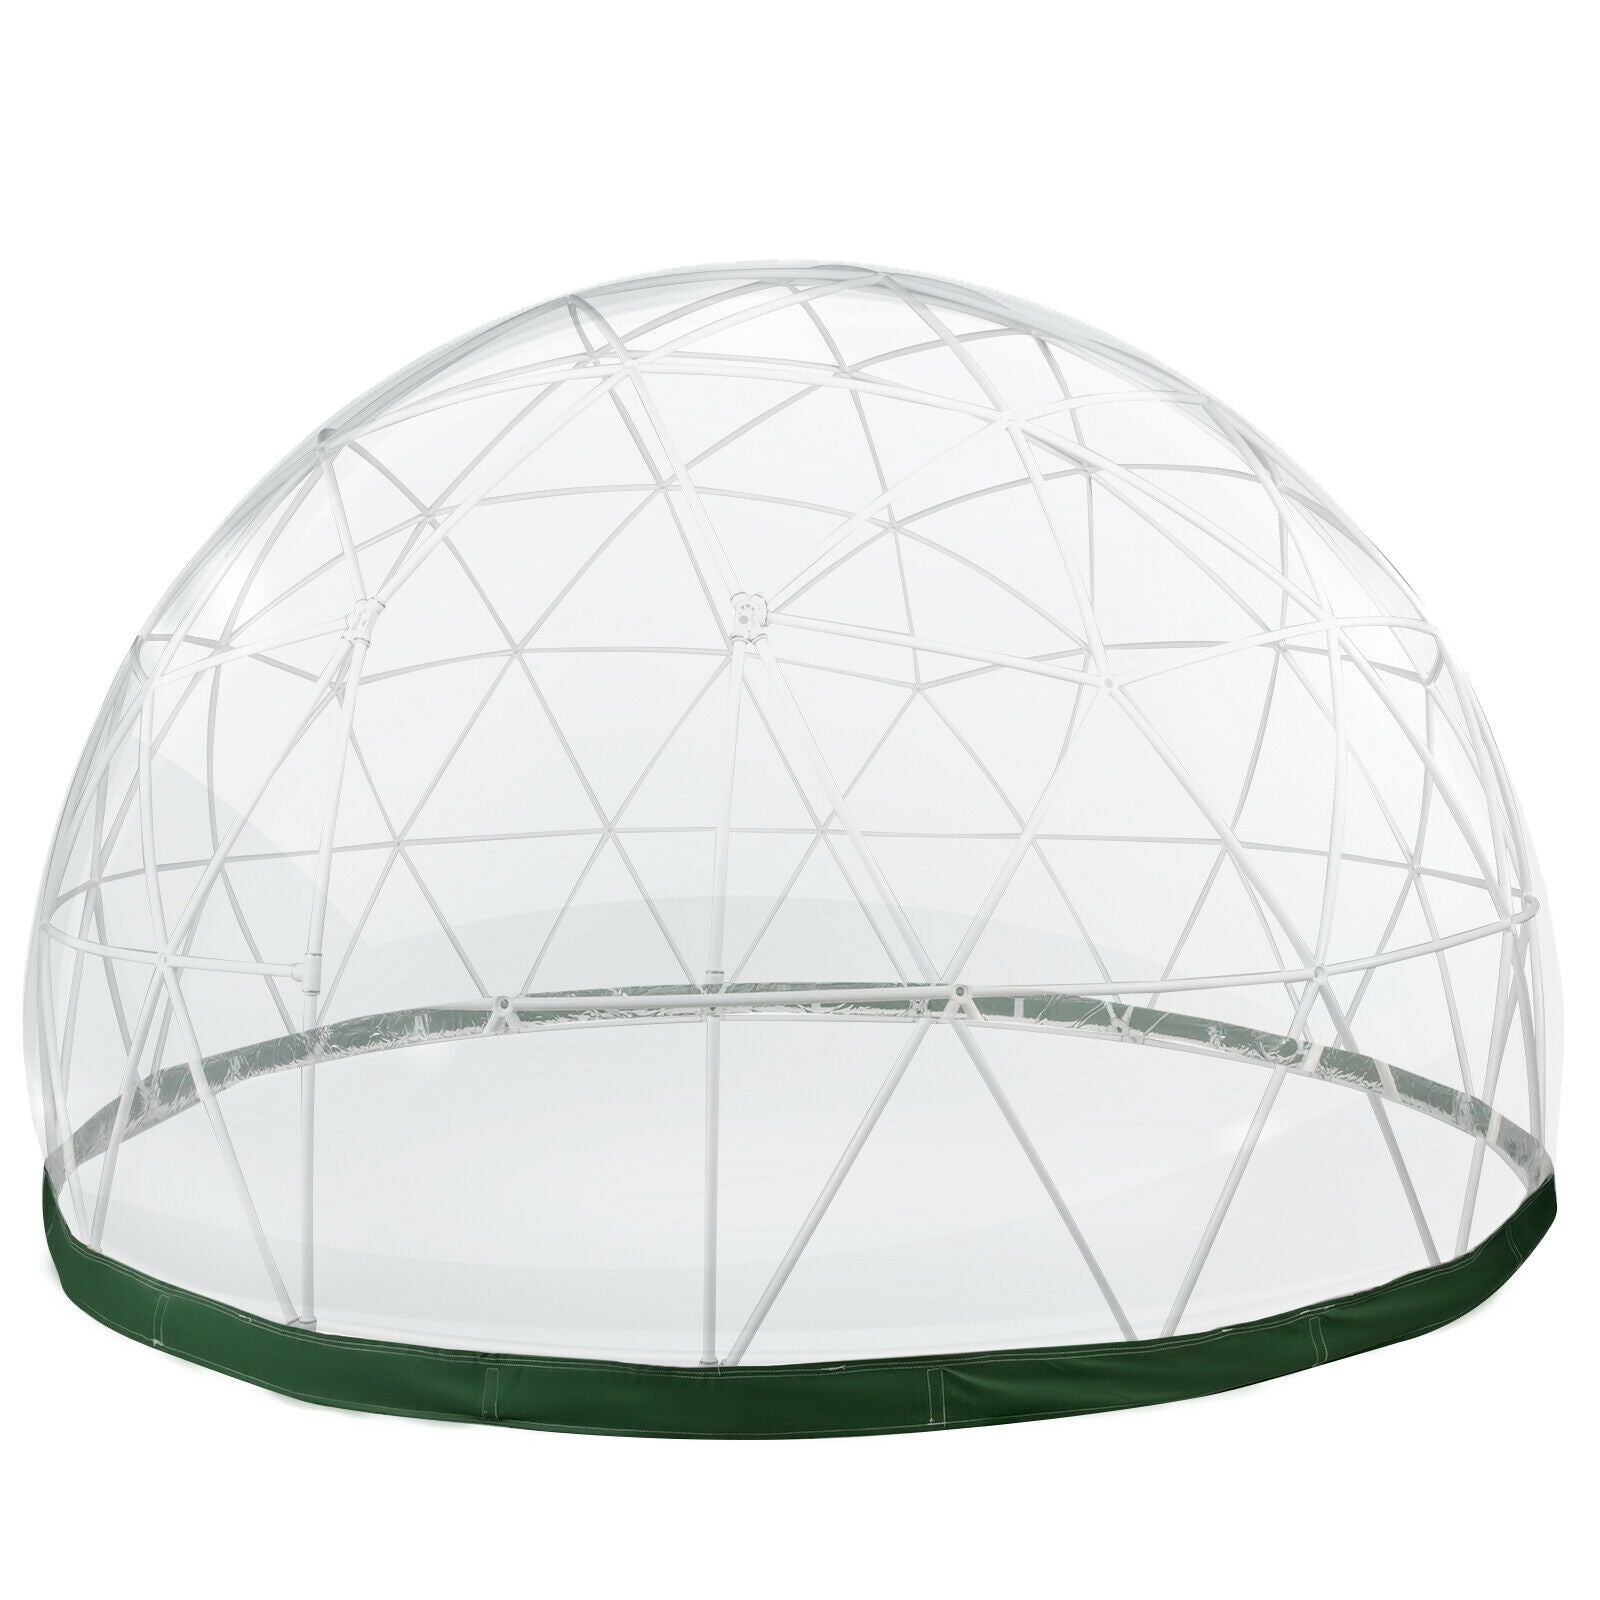 Buy Quality Garden Domes & Igloos in the US